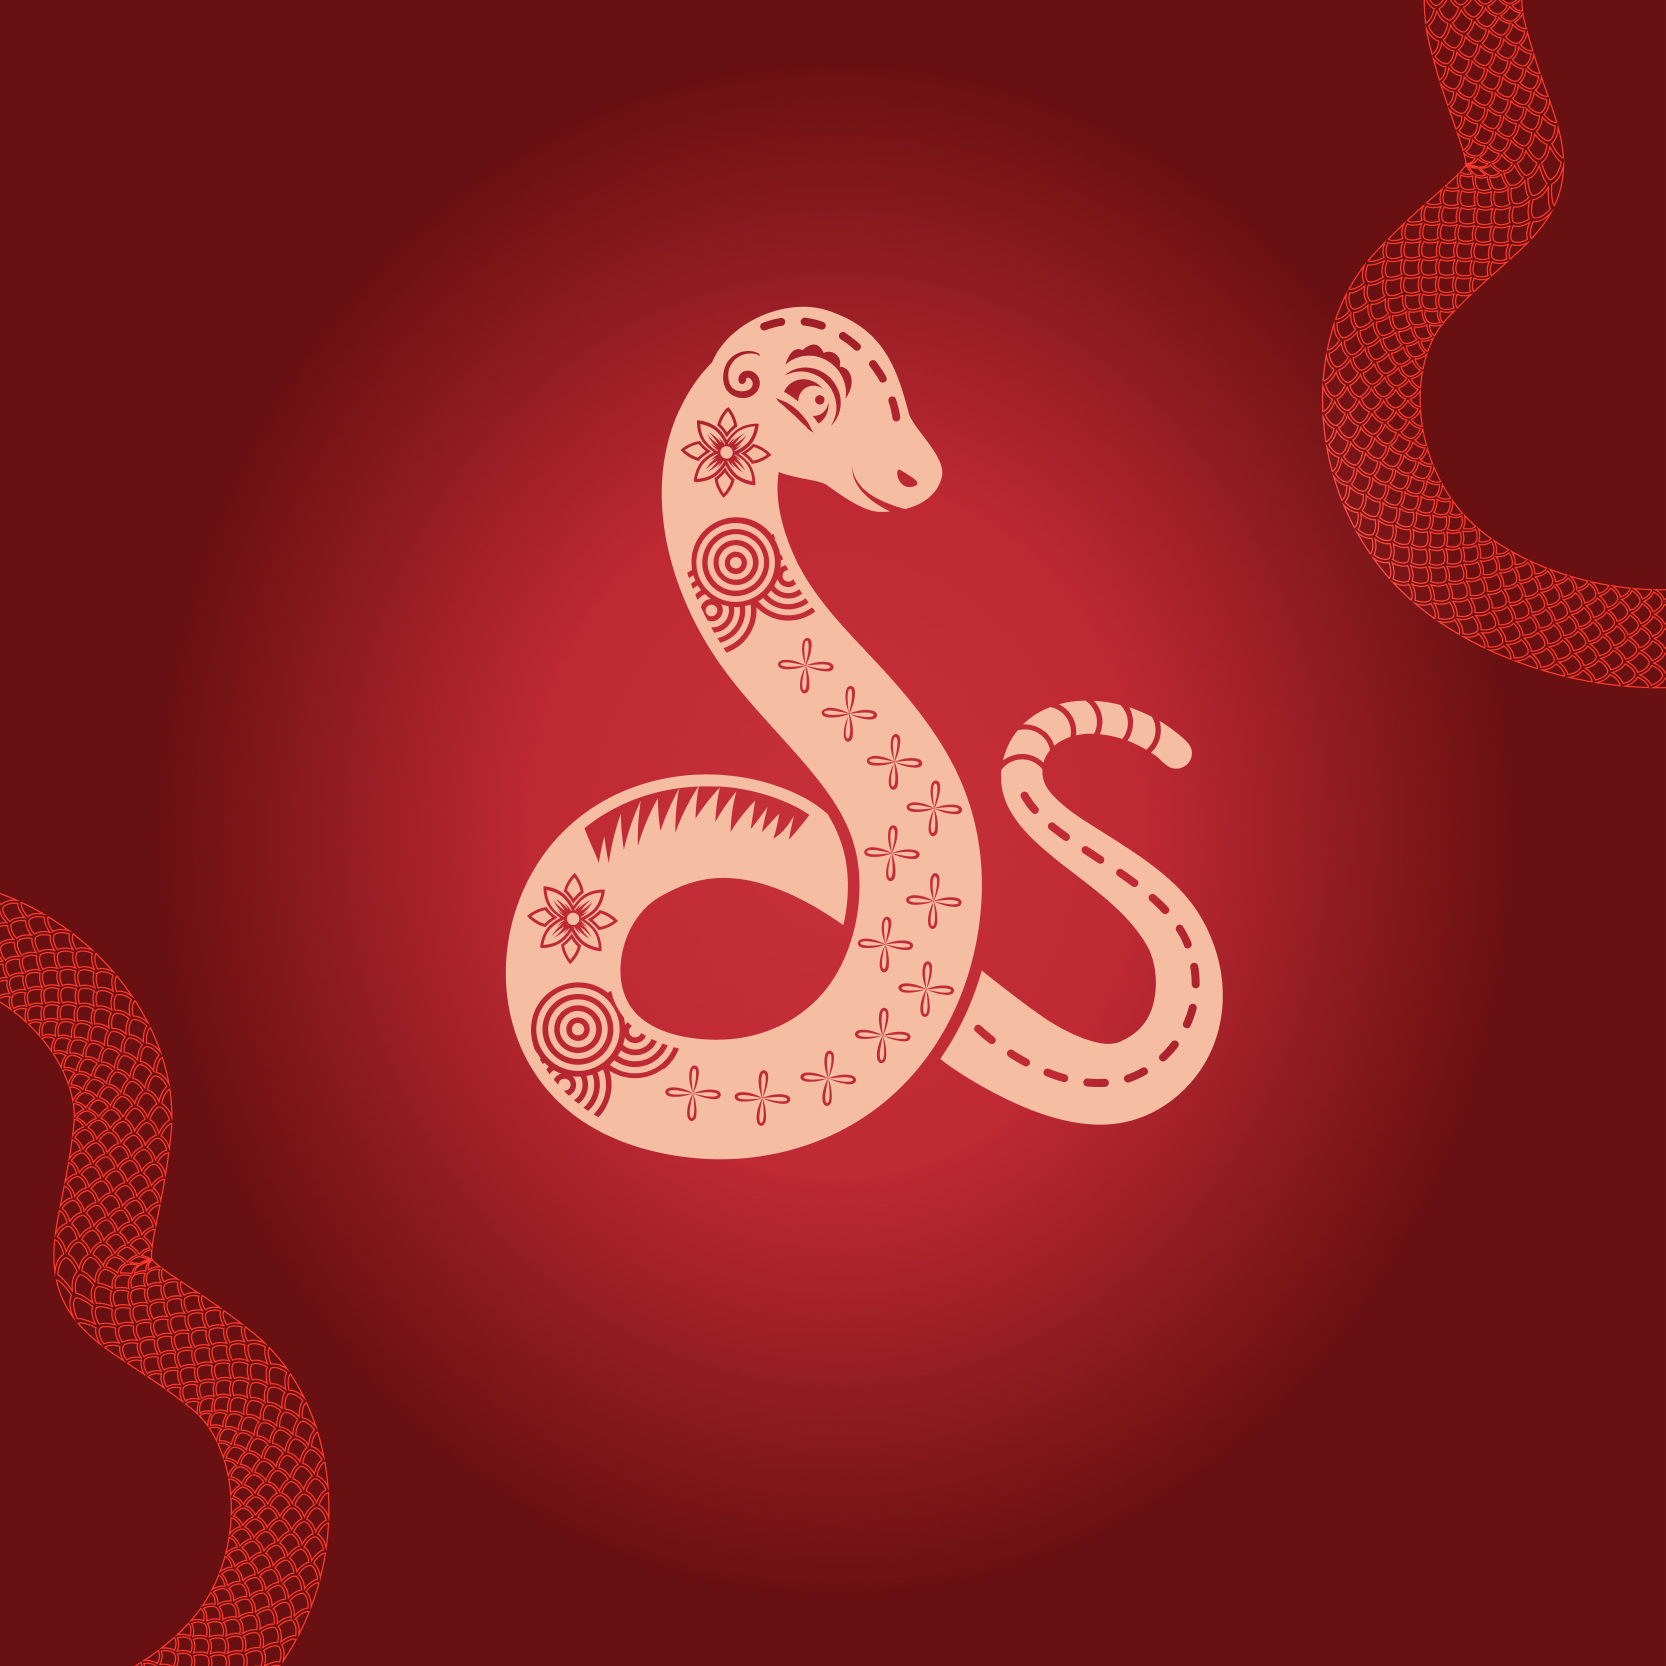 YEAR OF THE SNAKE